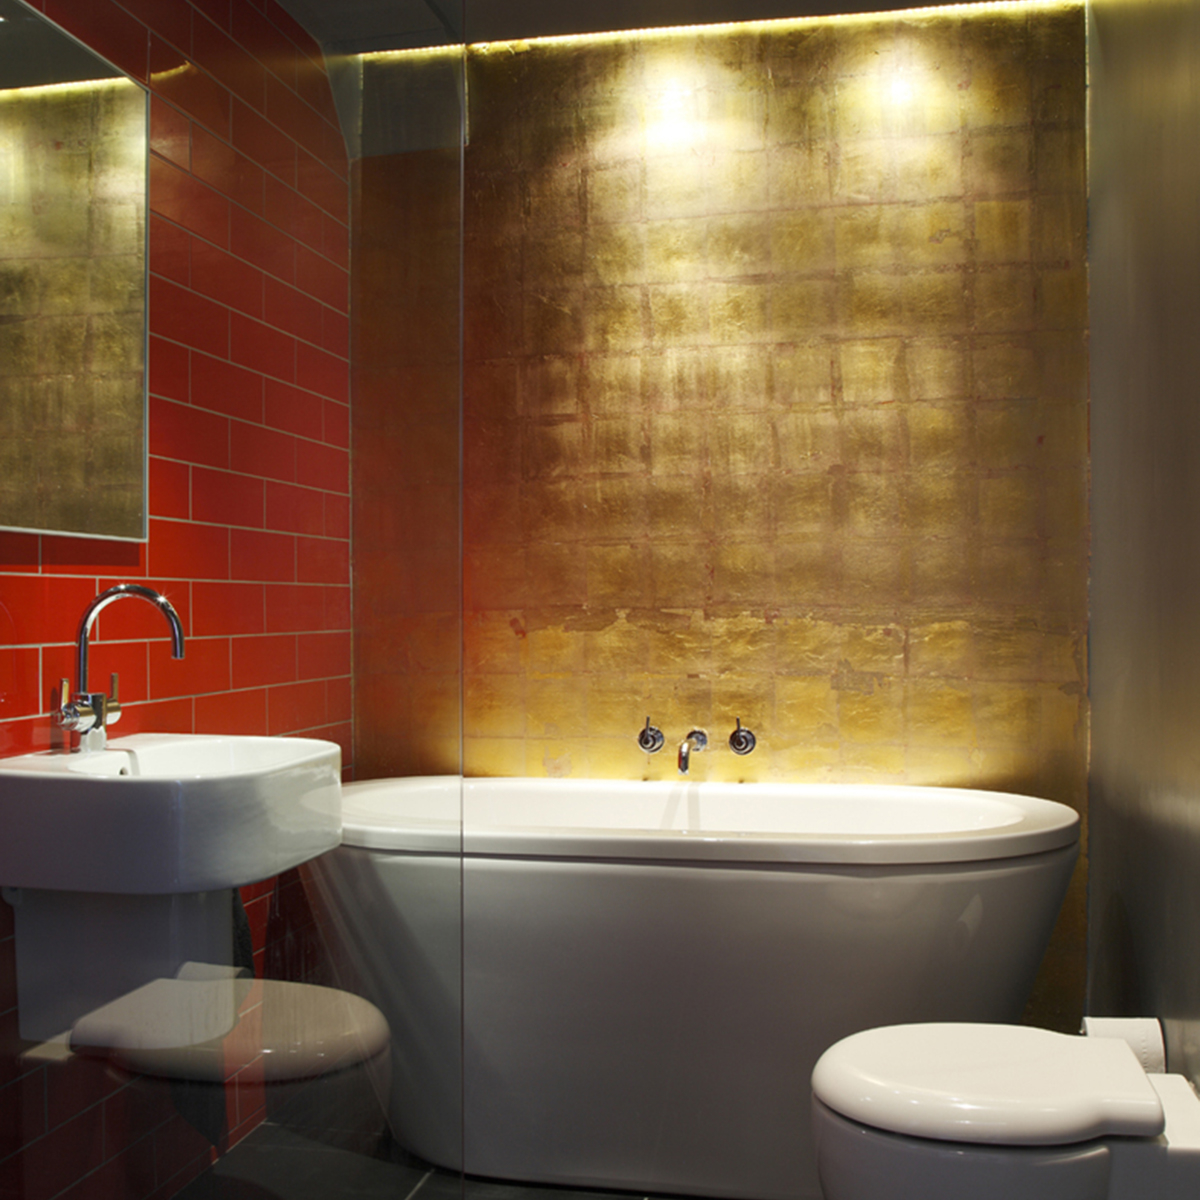 Freestanding modern bath with gold and red metro brick walls.